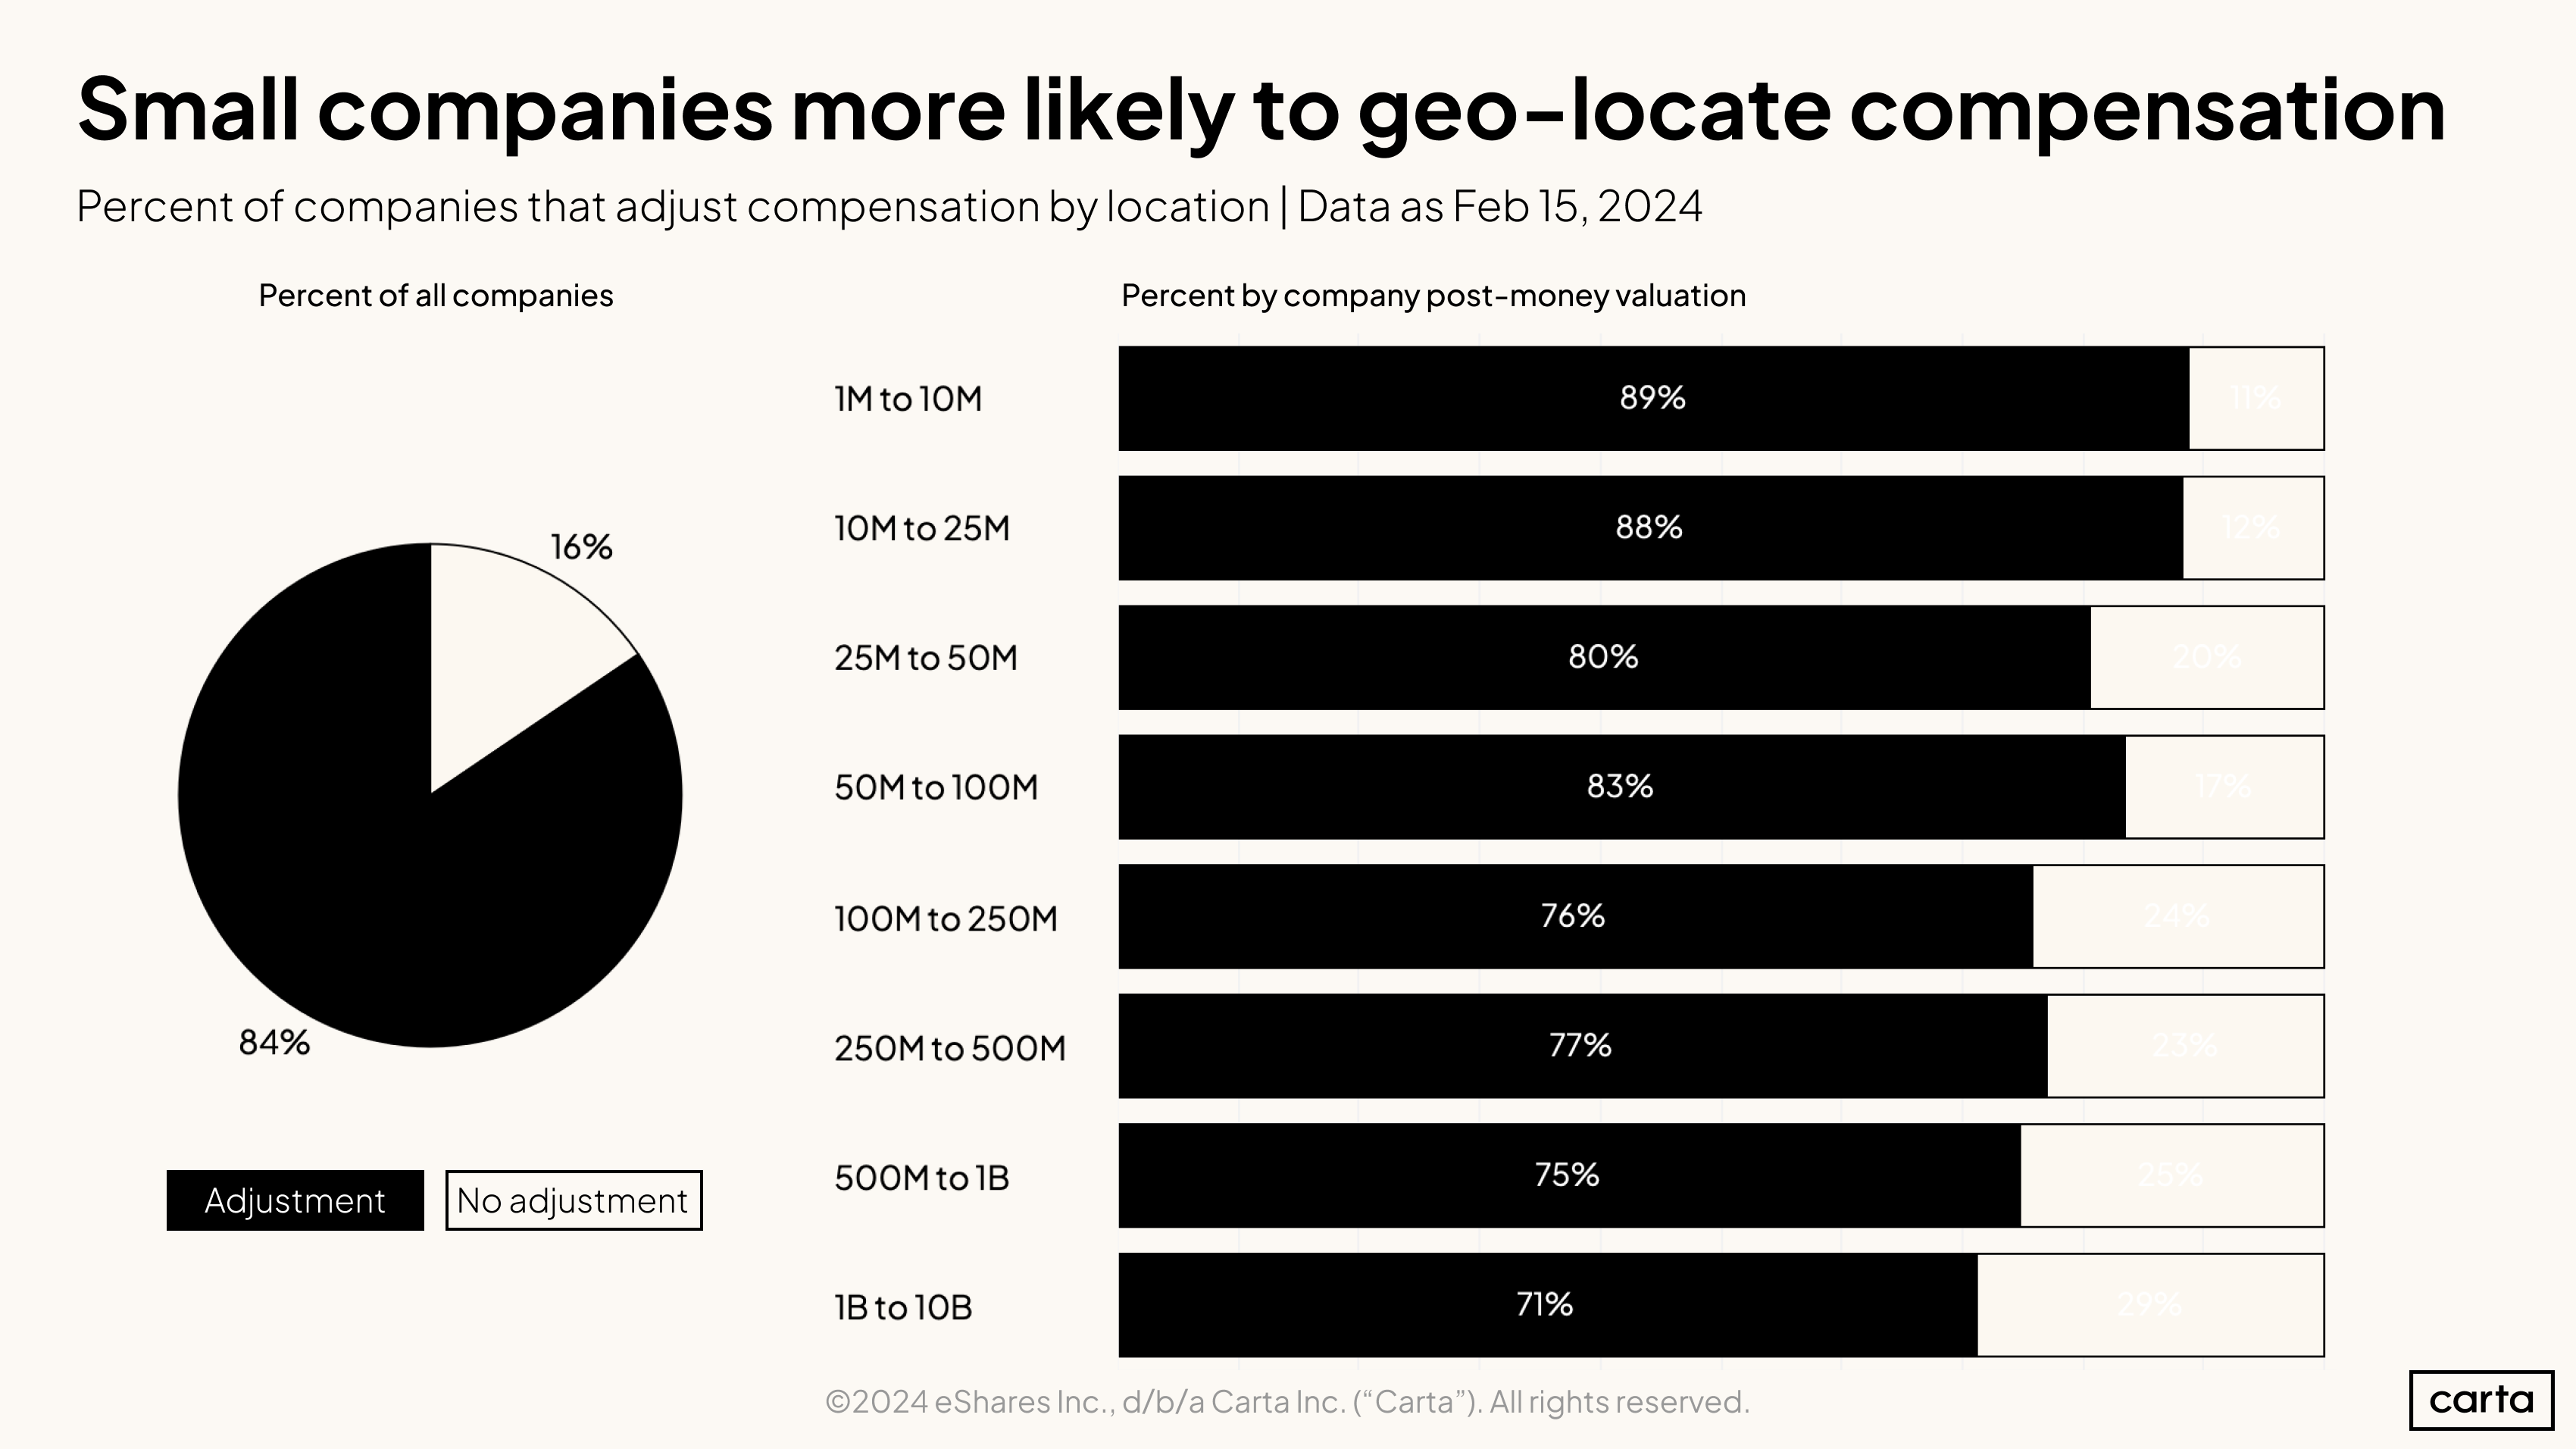 Small companies more likely to geo-locate compensation